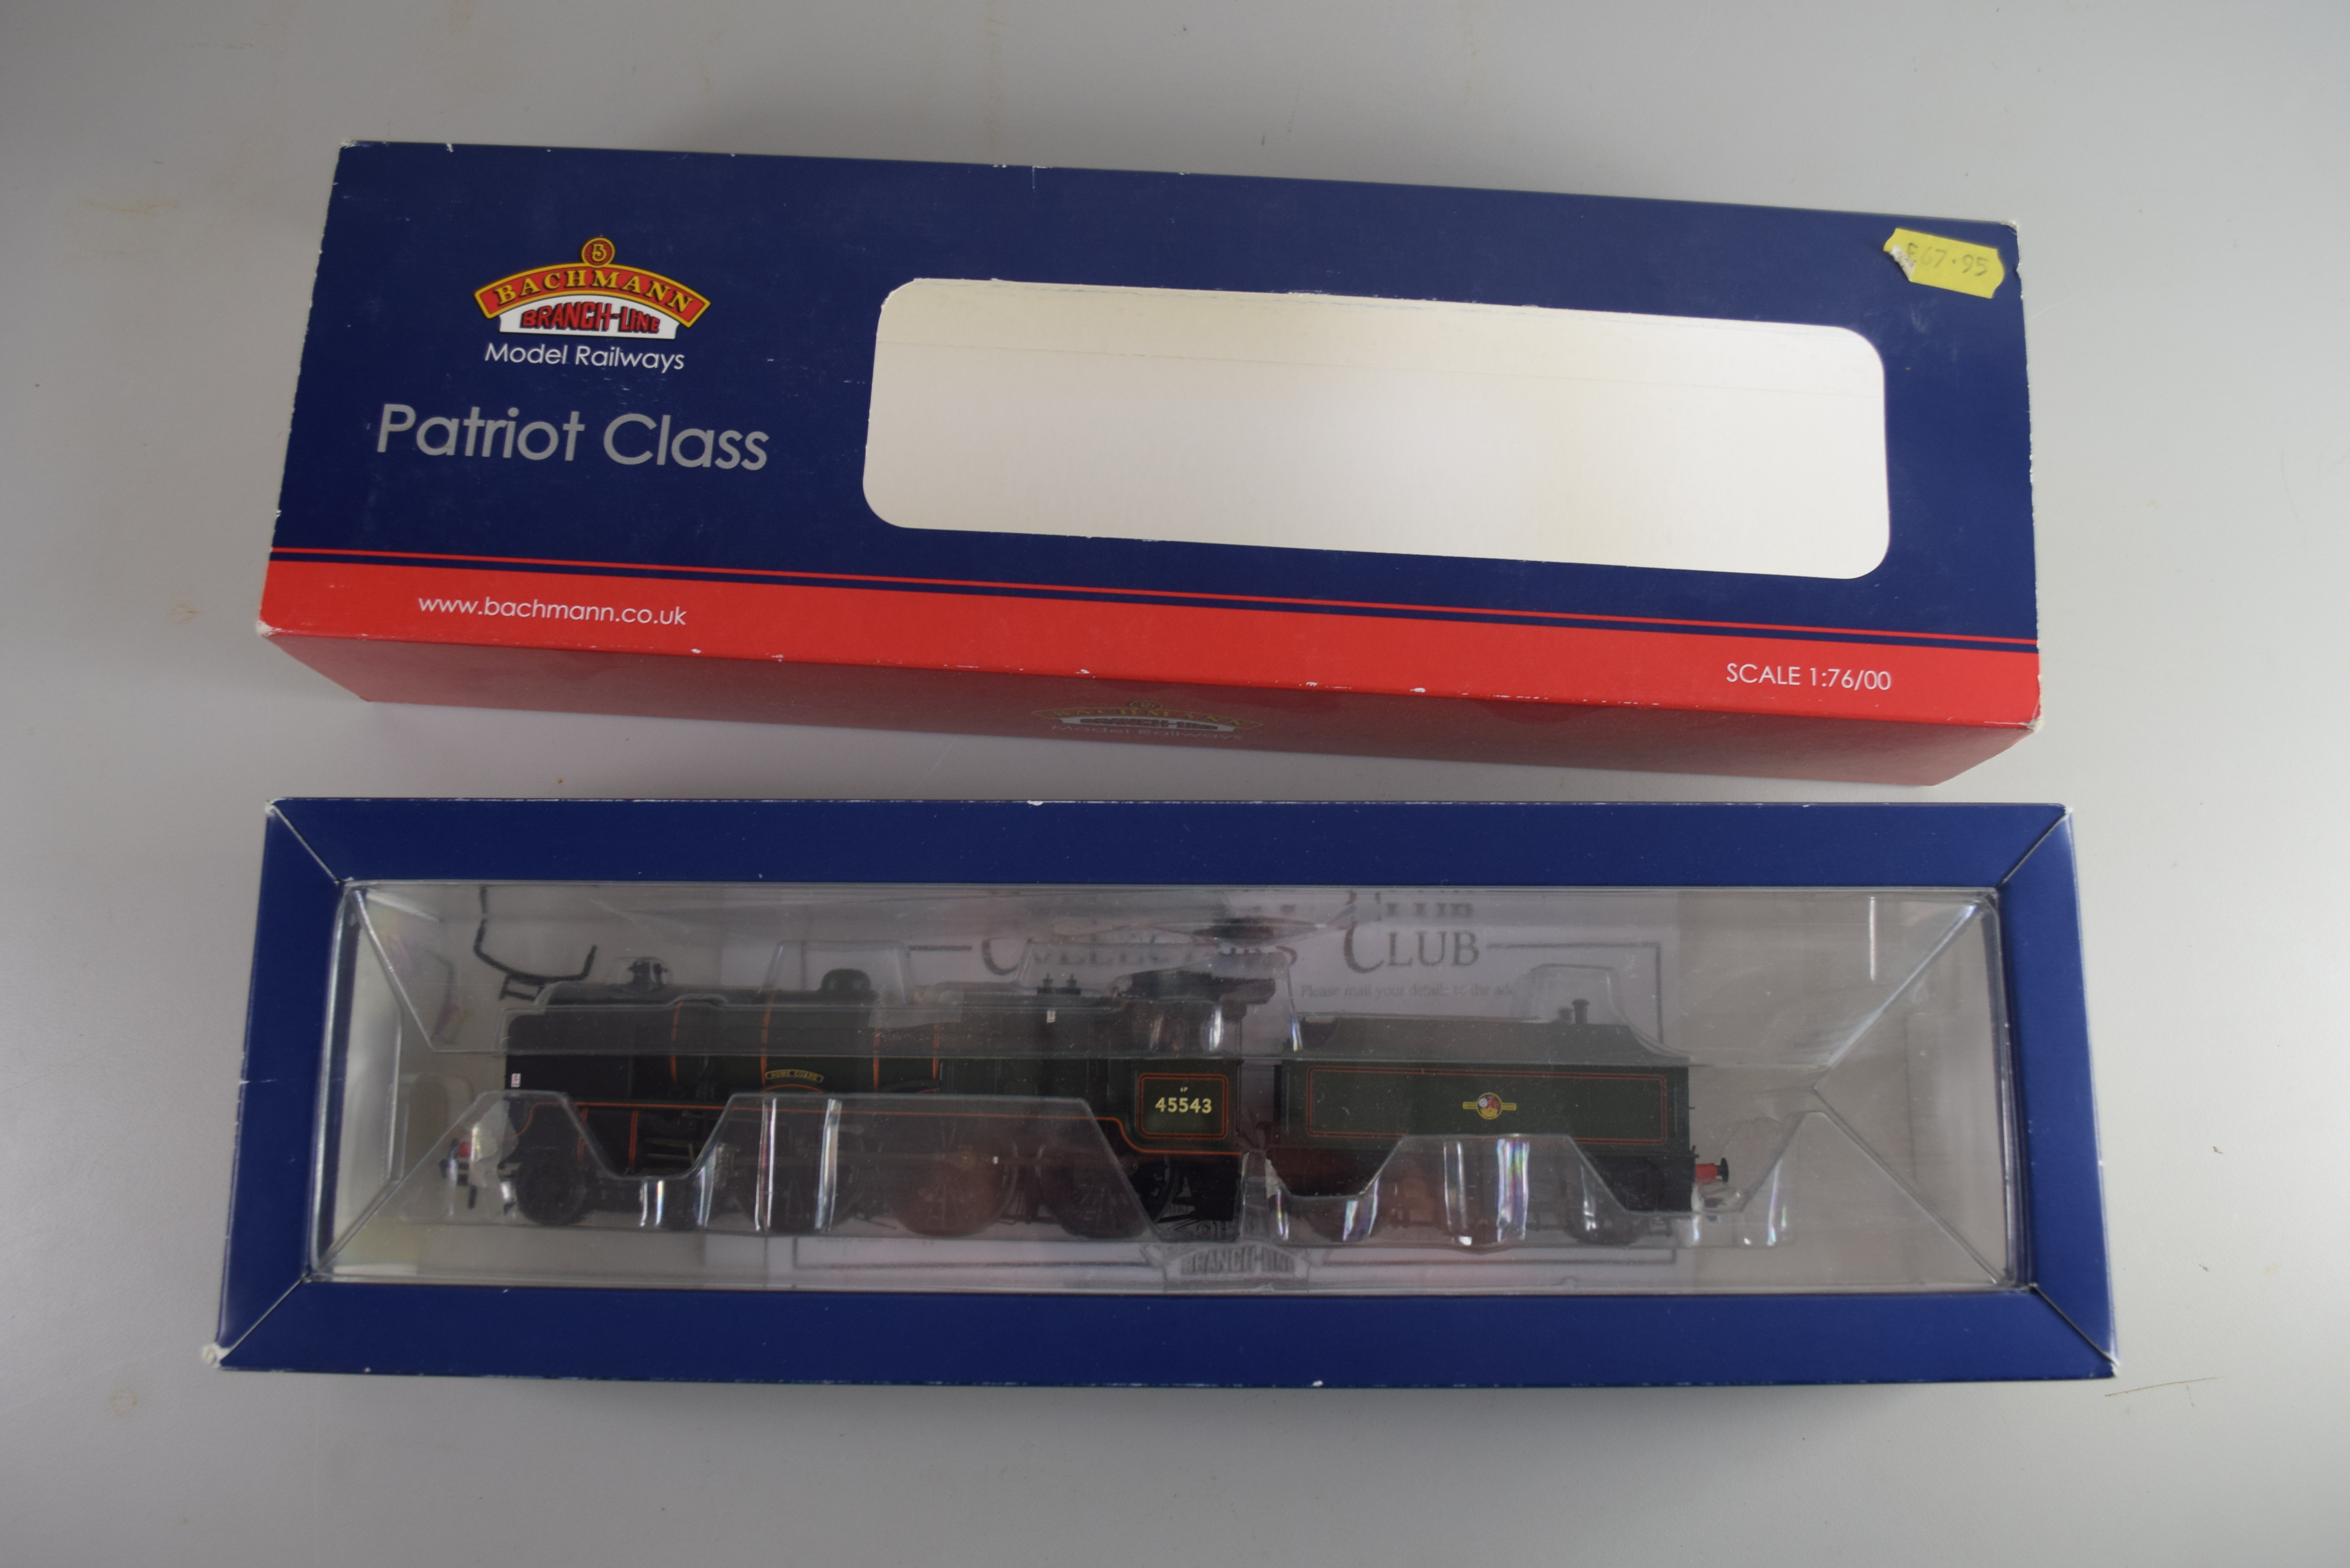 Boxed Bachmann 00 gauge 31-211 Patriot "Homeguard" BR green late crest No 45543 locomotive - Image 3 of 3